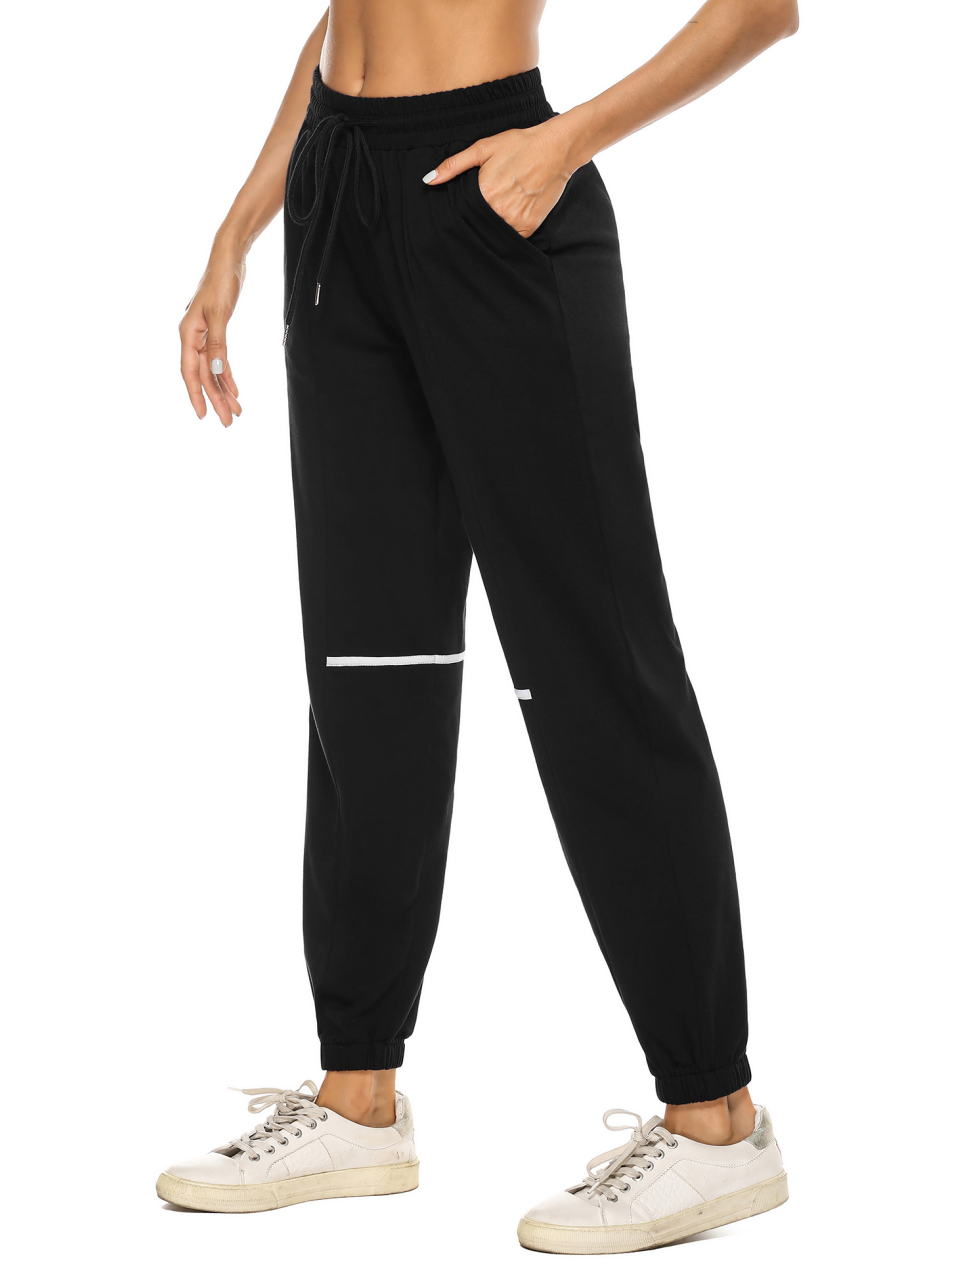 Women'S Casual Cotton Loose Sweatpants Drawstring Waist Jogging Pants With Pockets Running Gym Yoga